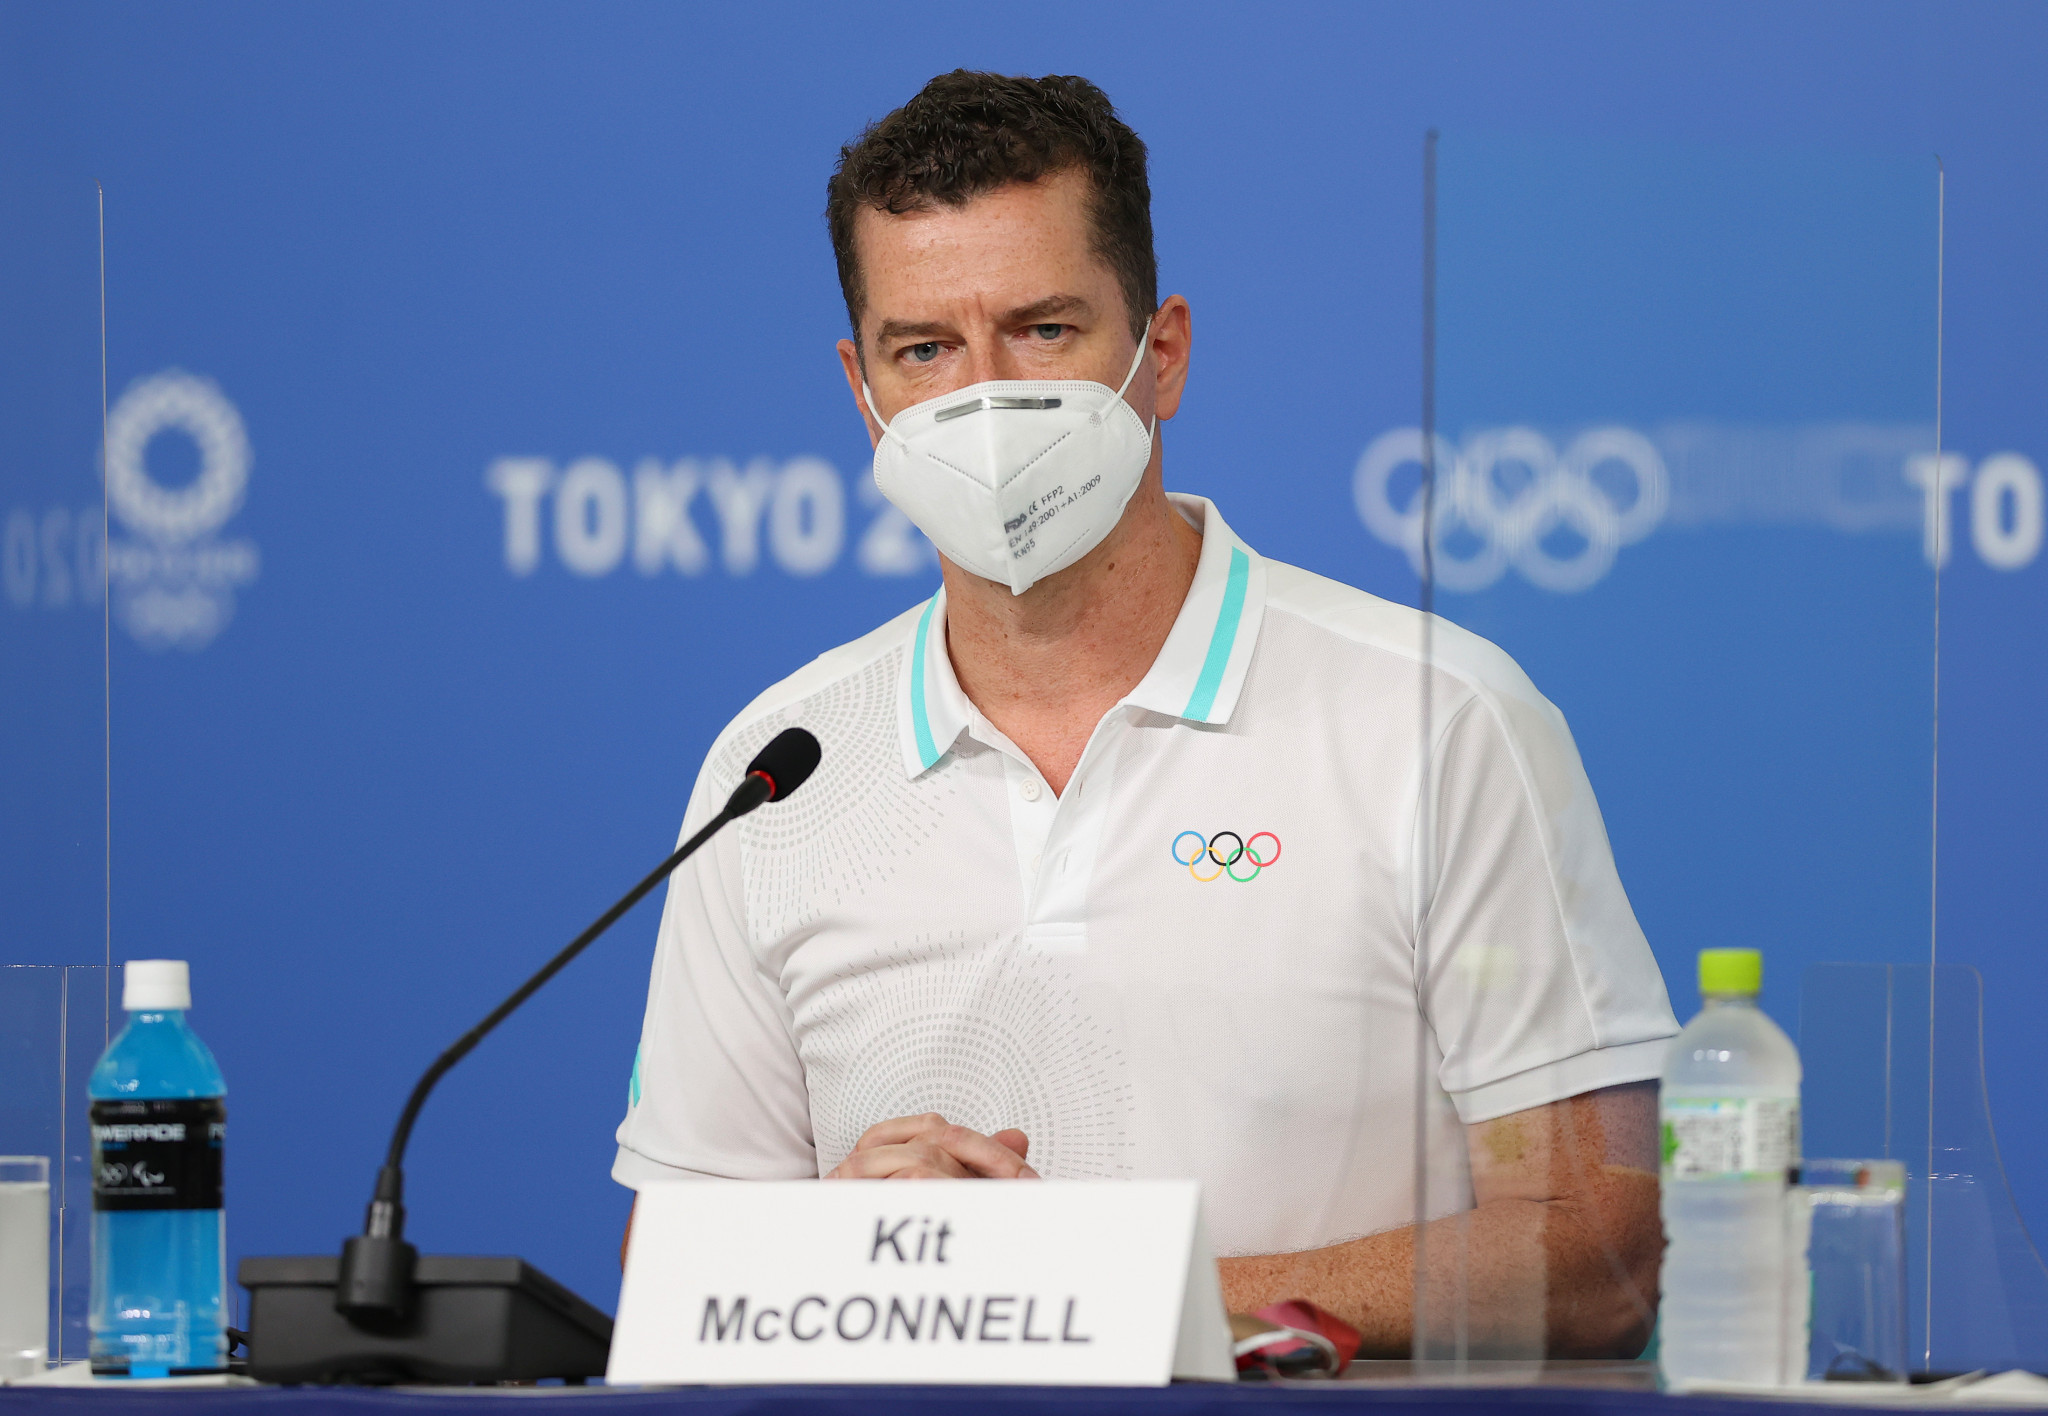 IOC sports director Kit McConnell will present on lessons learned at Tokyo 2020 ©Getty Images